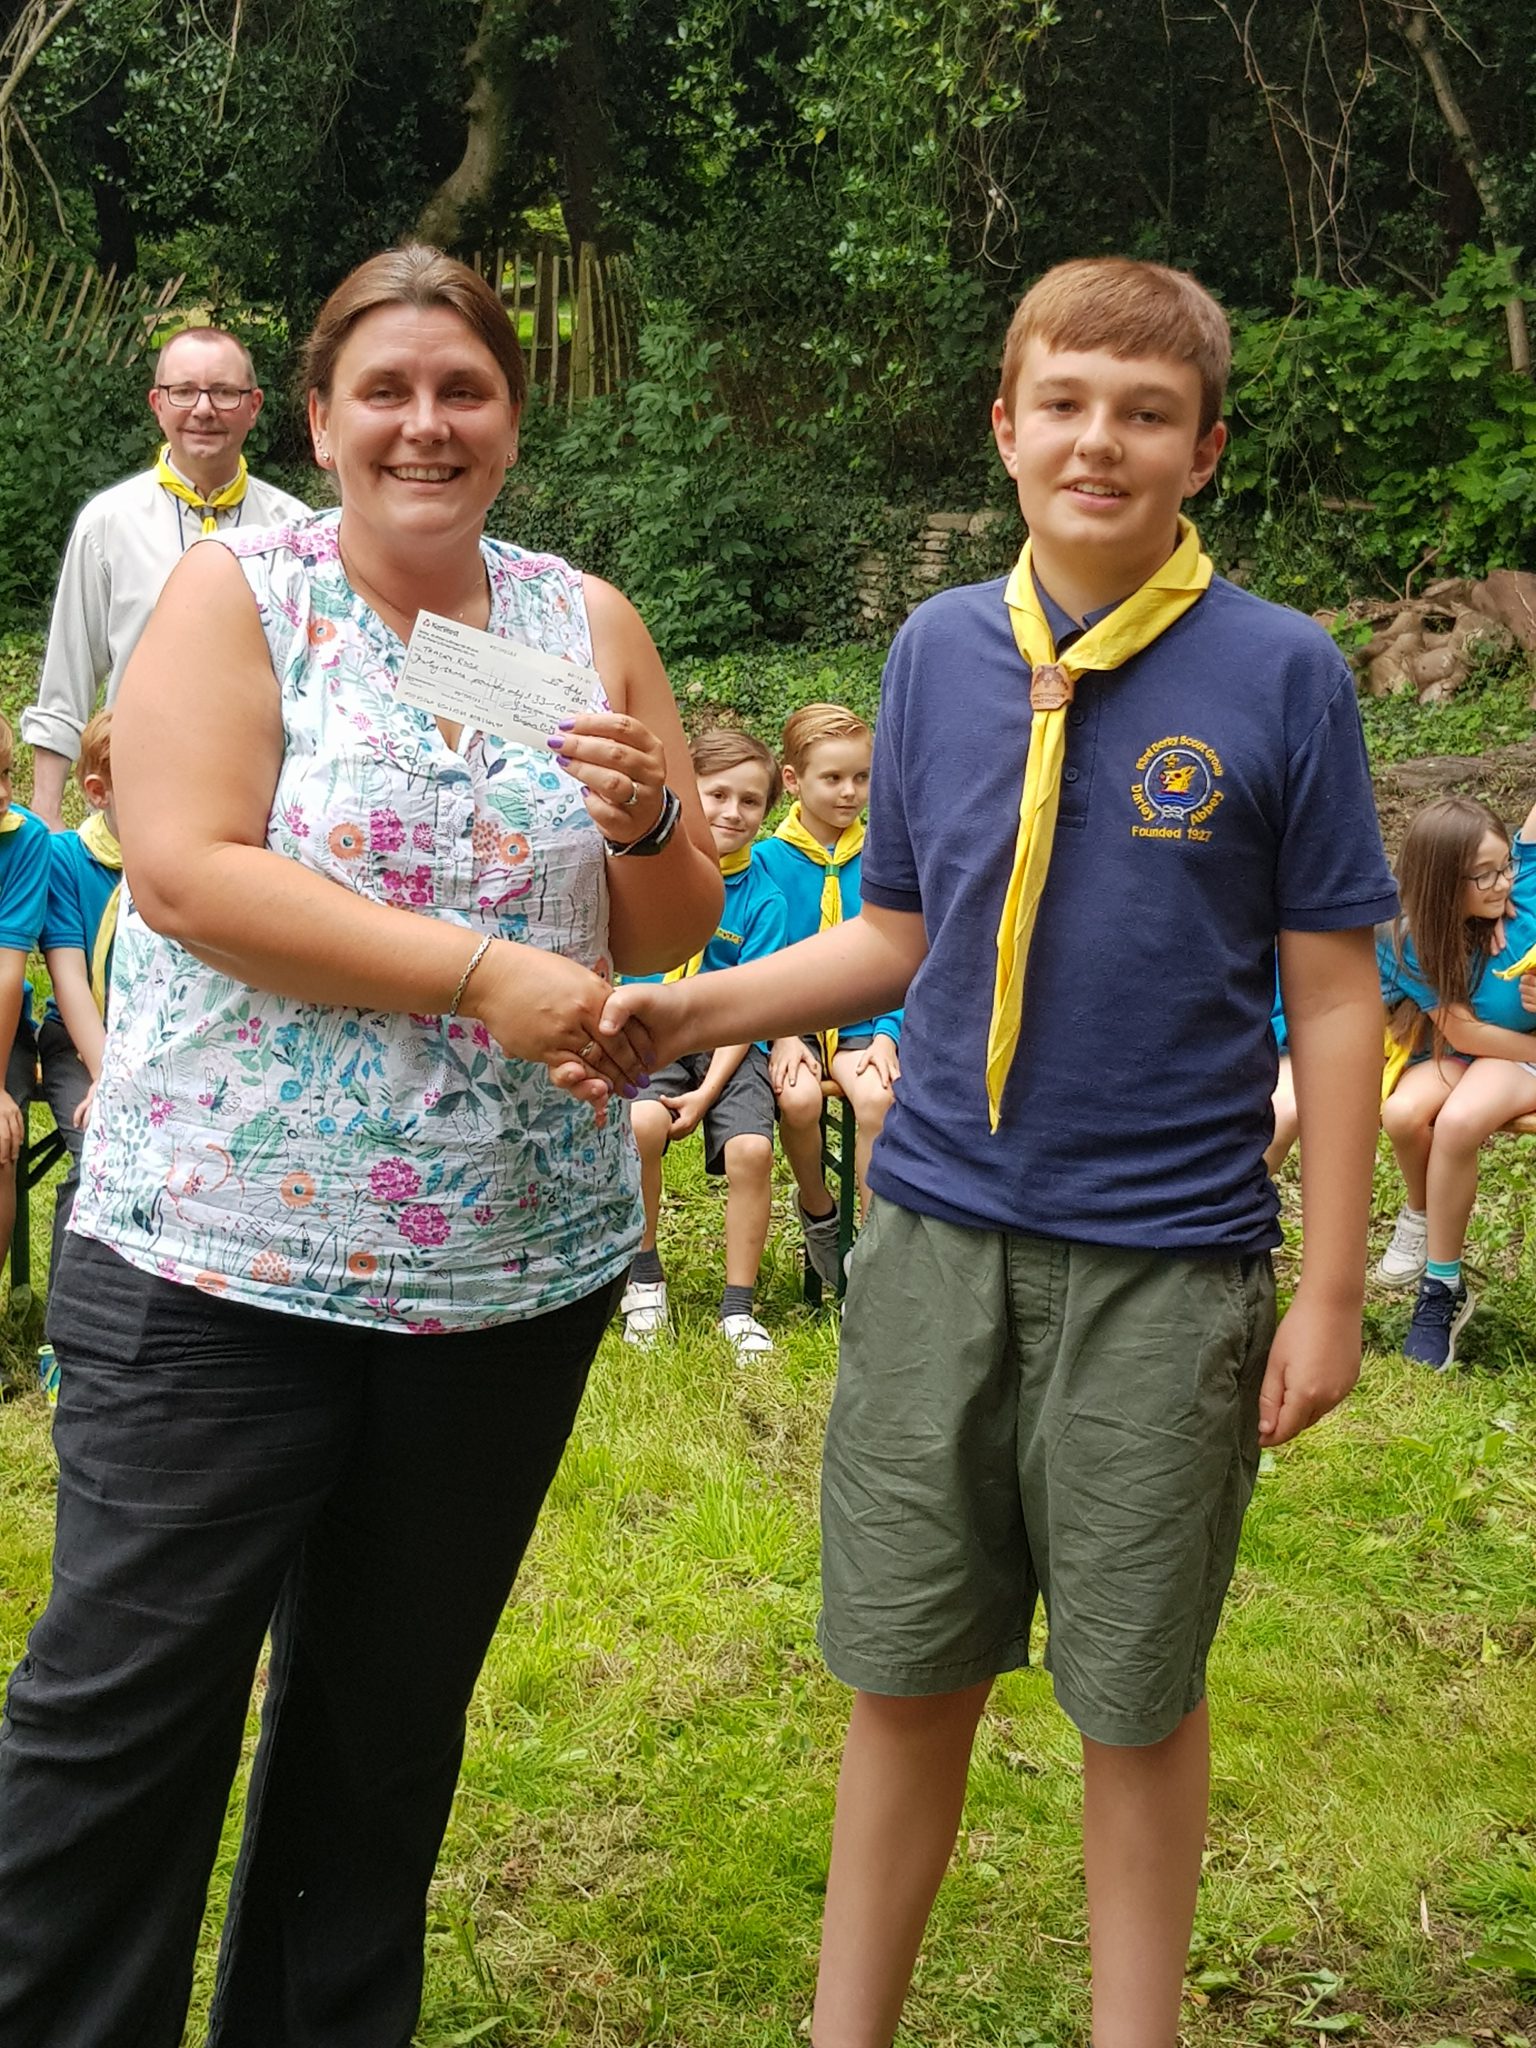 Ben presents a cheque to Tracey who won the June 2019 draw